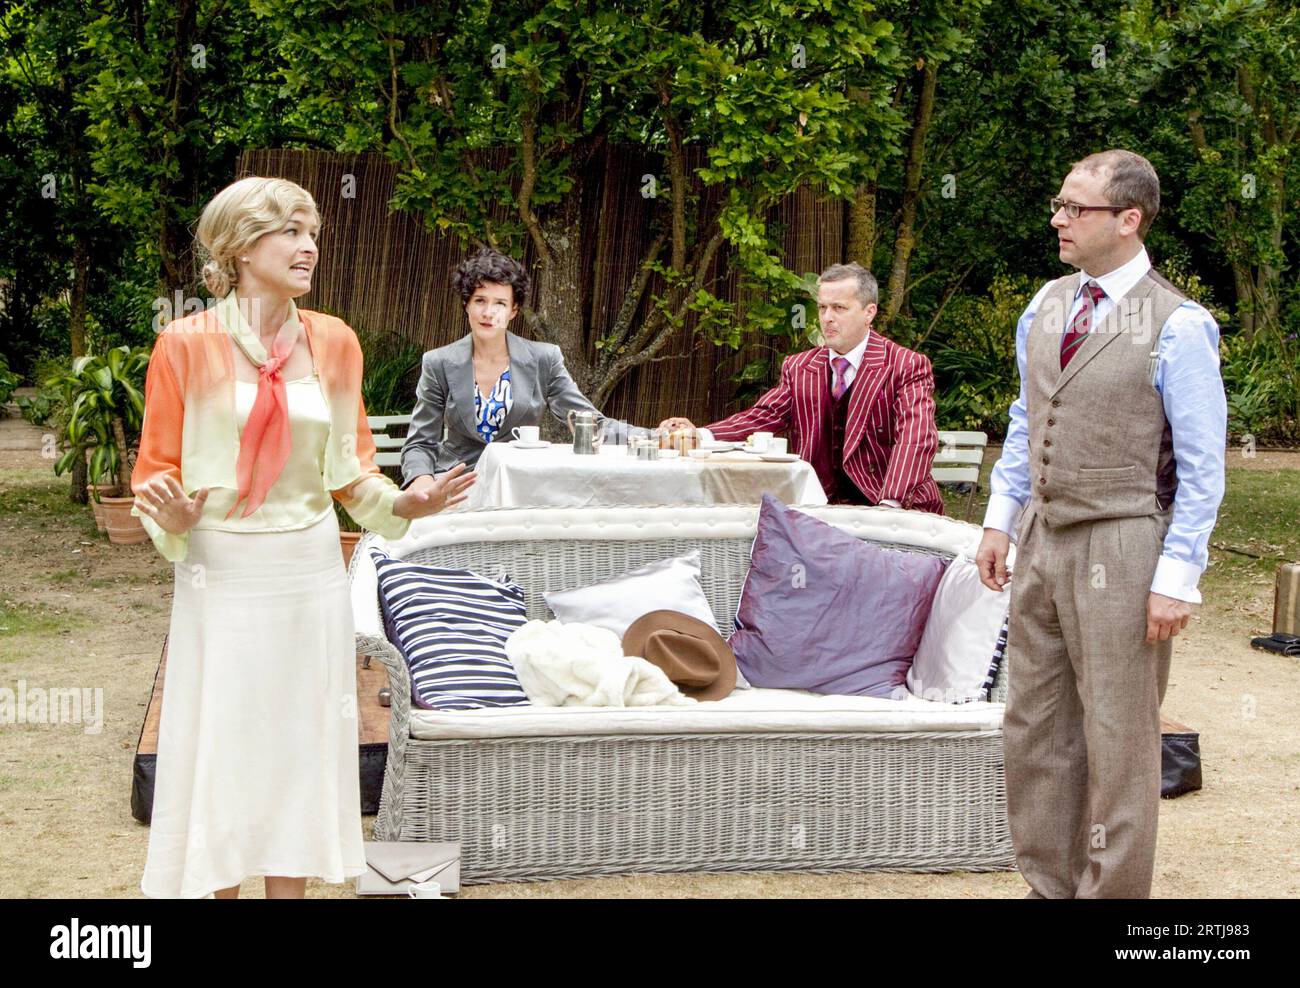 l-r: Sophie Franklin (Sybil Chase), Pandora Clifford (Amanda Prynne), Rodney Matthew (Elyot Chase), Christopher Jordan (Victor Prynne) in PRIVATE LIVES by Noel Coward at Wadham College Gardens, Oxford, England  28/07/2010 an Oxford Shakespeare Company production  costumes: Adrian Lillie  director: Nicholas Green Stock Photo